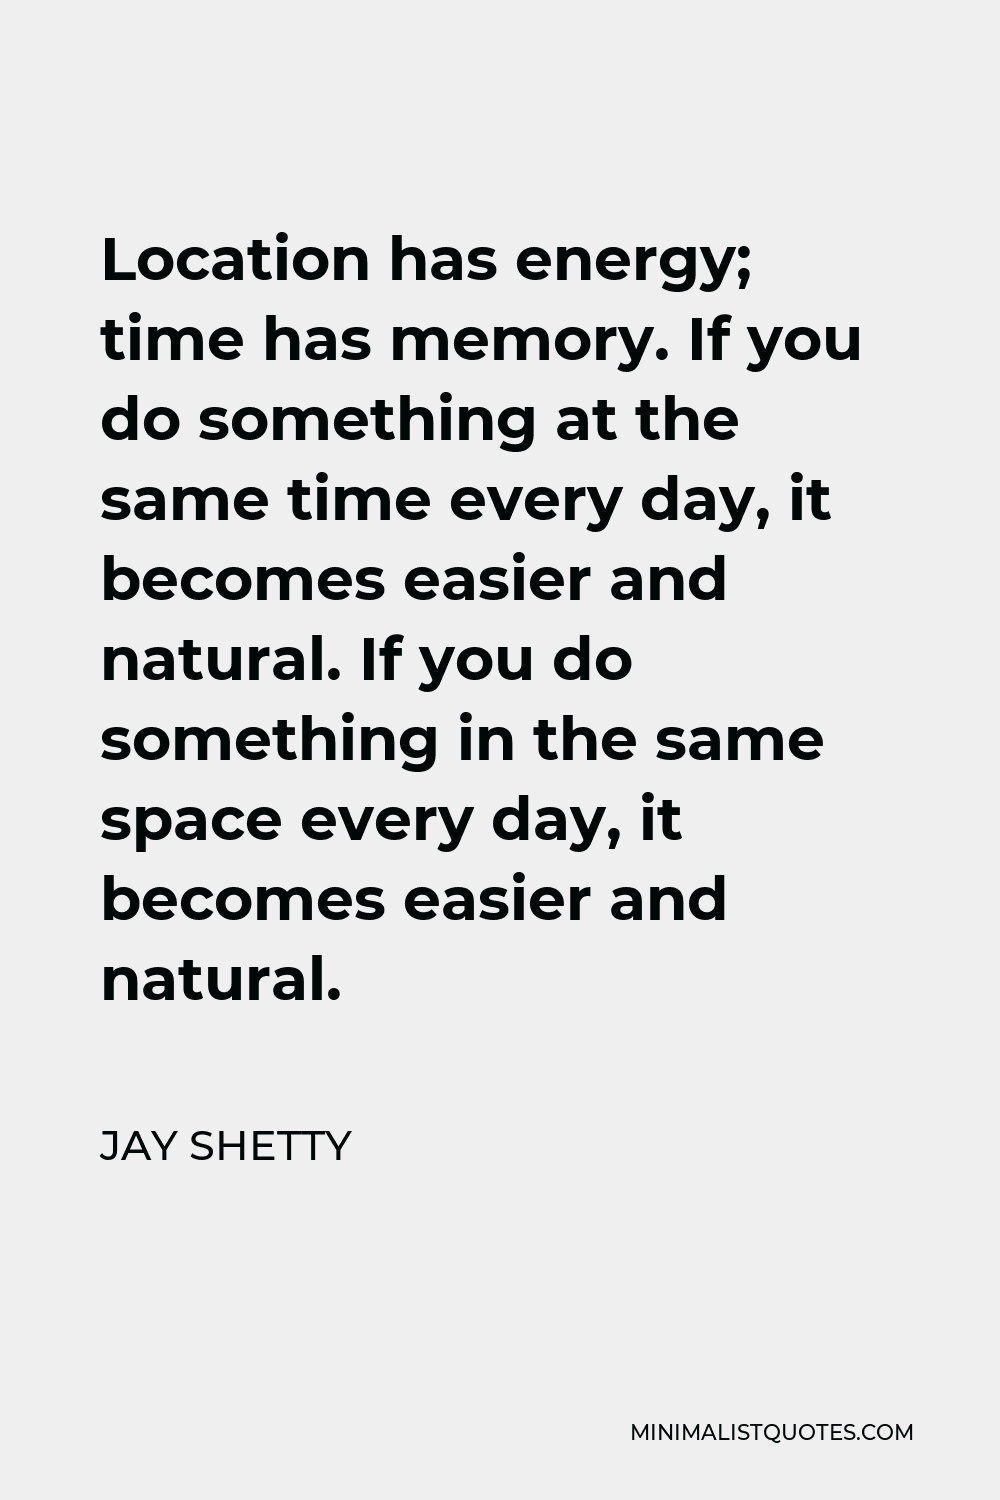 Jay Shetty Quote - Location has energy; time has memory. If you do something at the same time every day, it becomes easier and natural. If you do something in the same space every day, it becomes easier and natural.